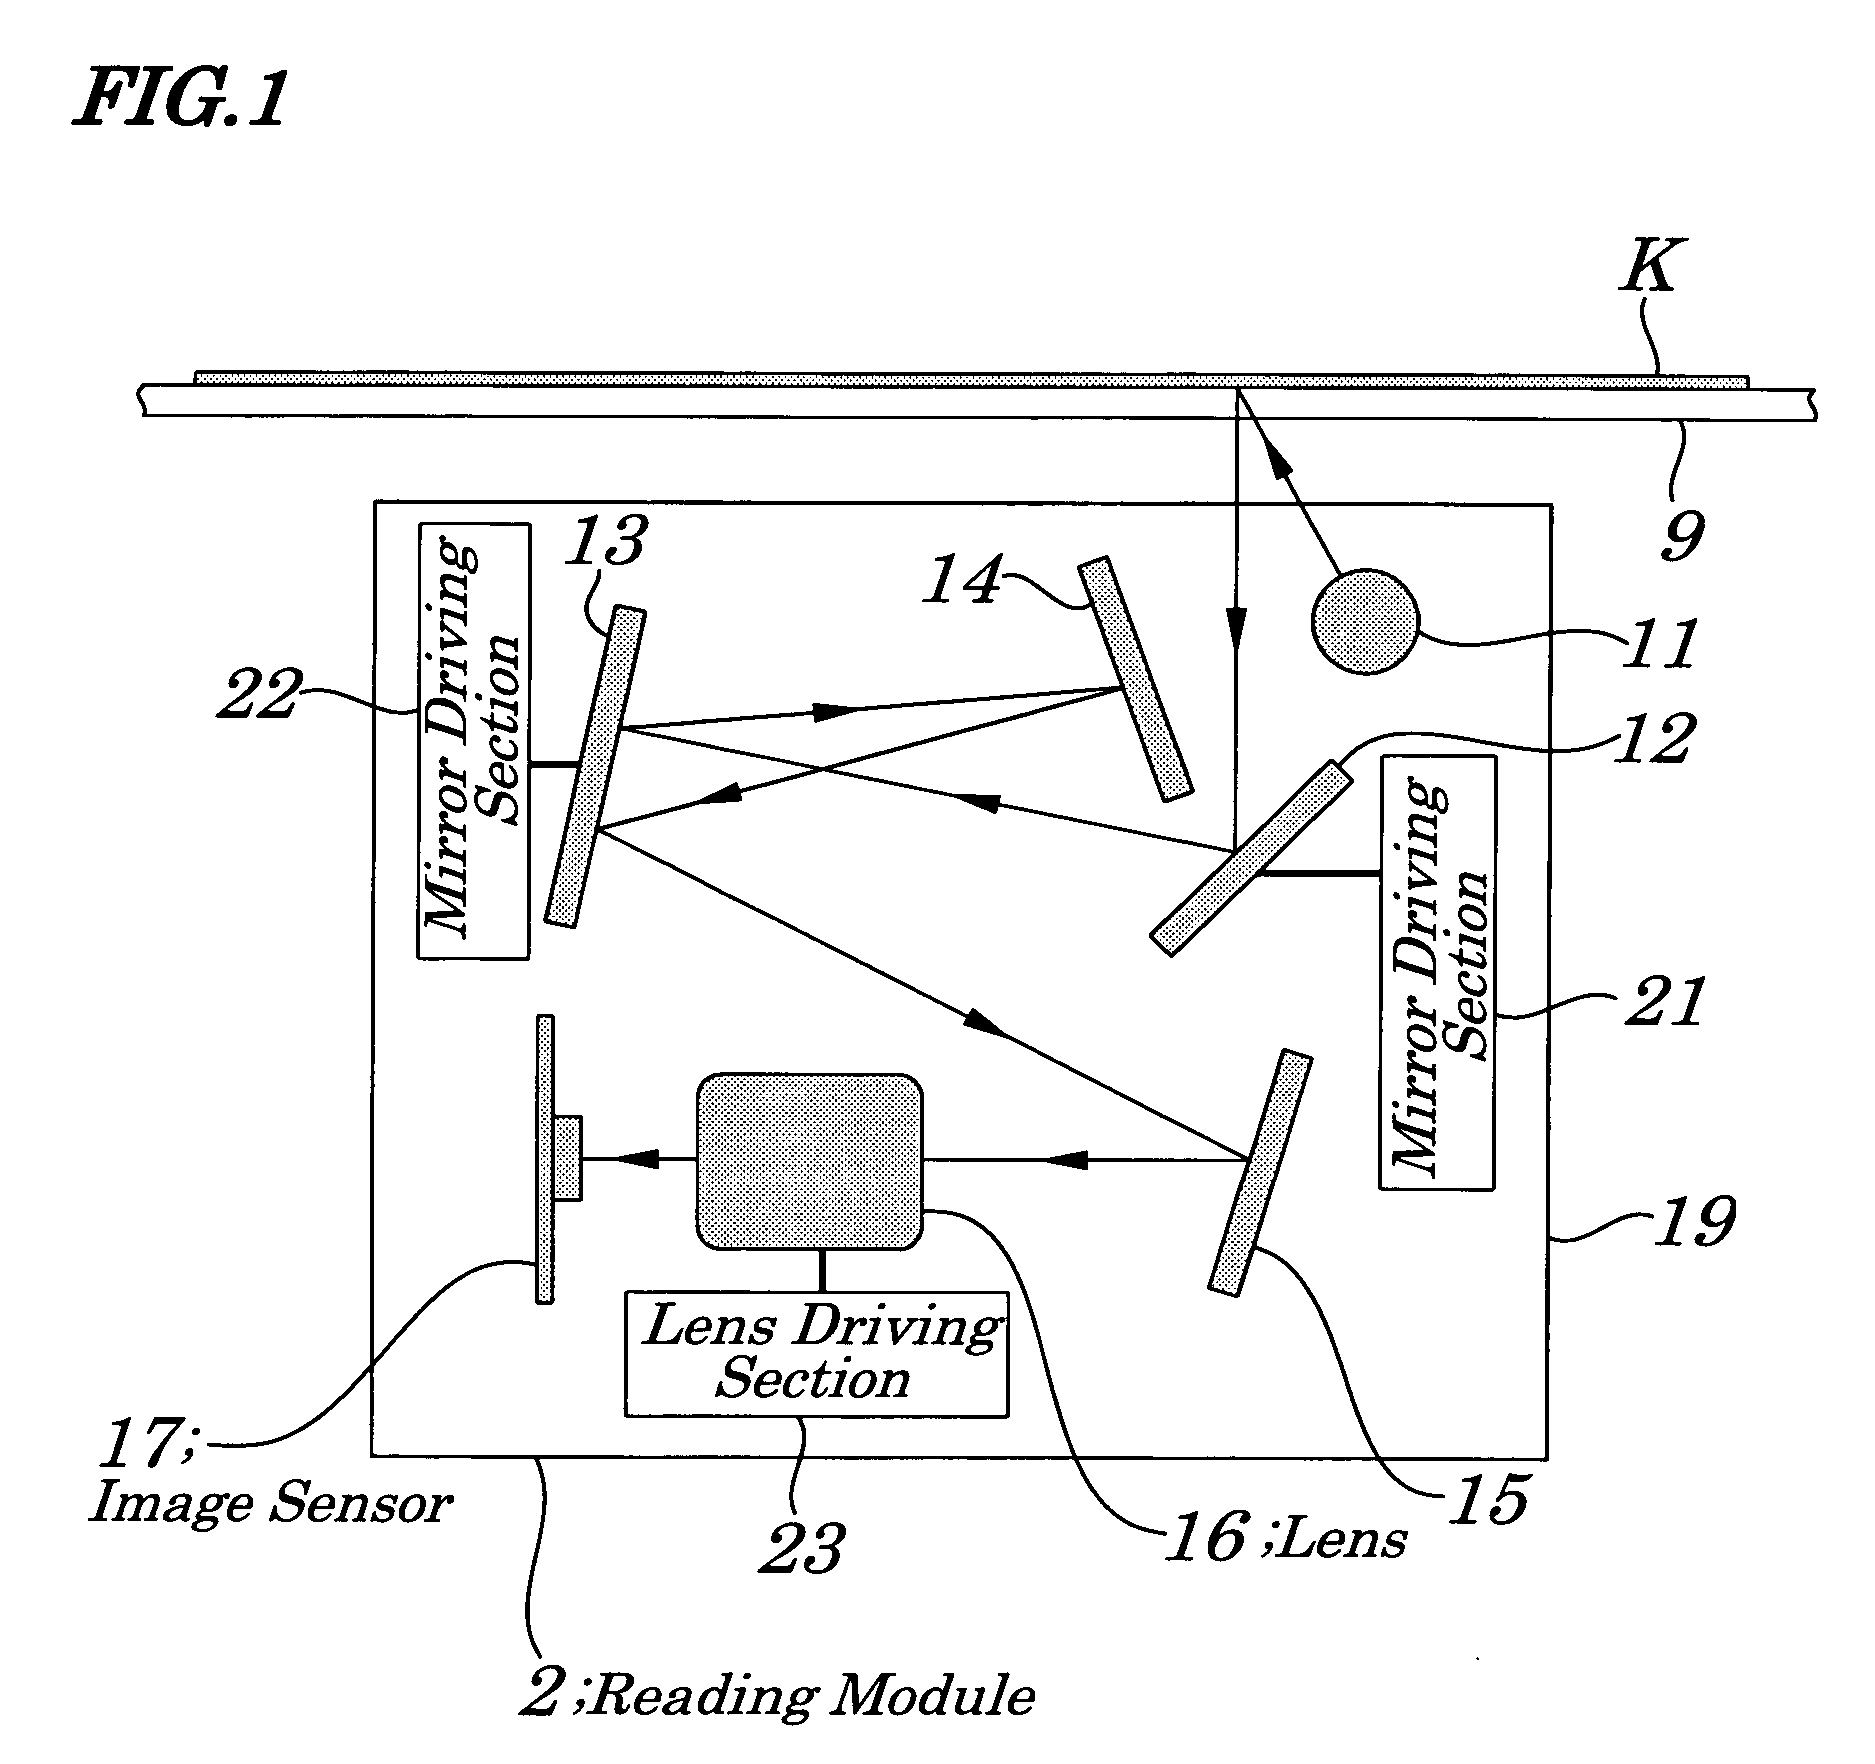 Image reading device and method of scaling up or down image to be read